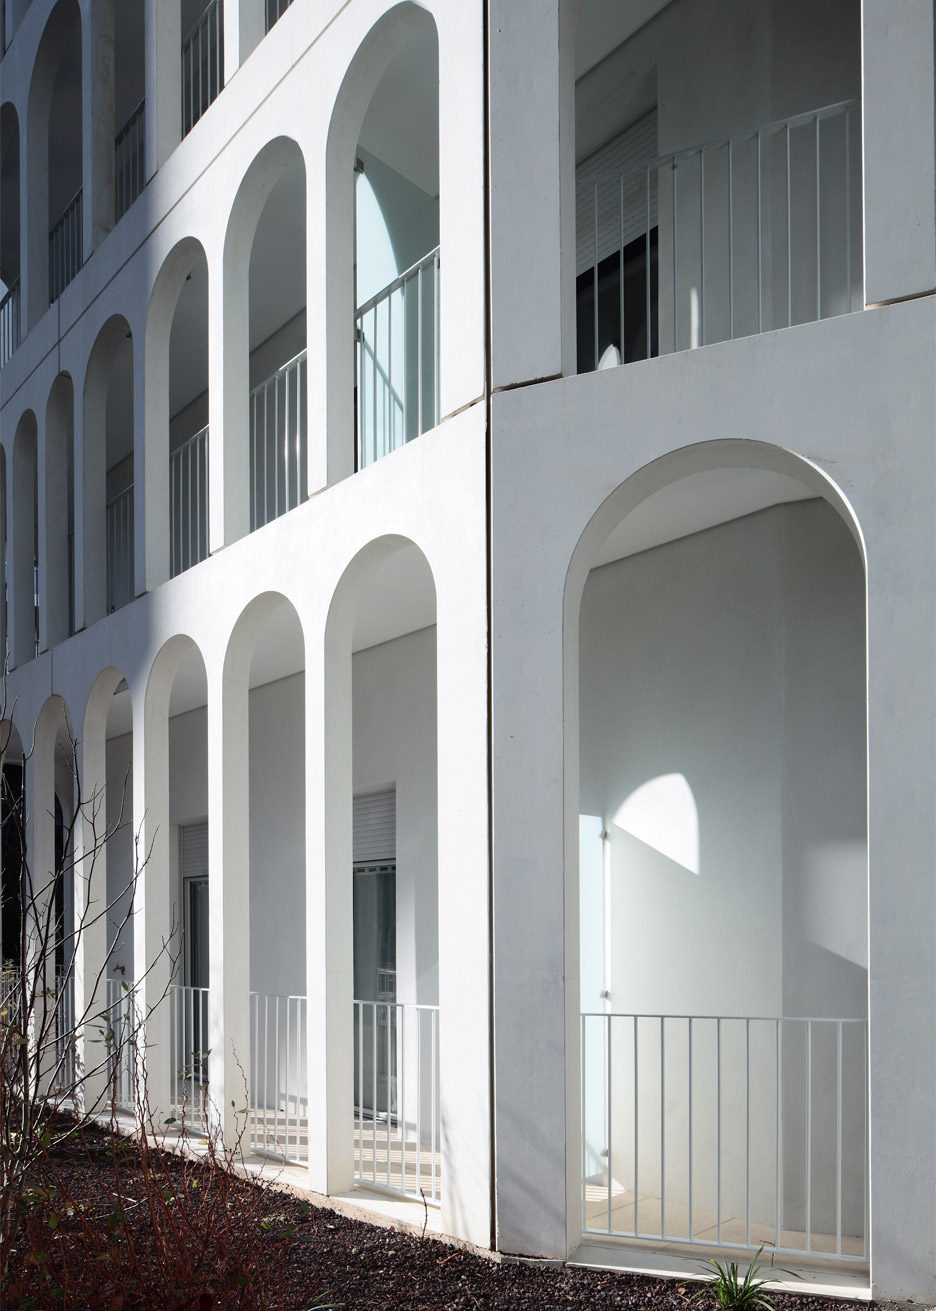 Photograph by Benoit Fougeirol of Arches Boulogne by Antonini Darmon, a social housing scheme in Paris, France